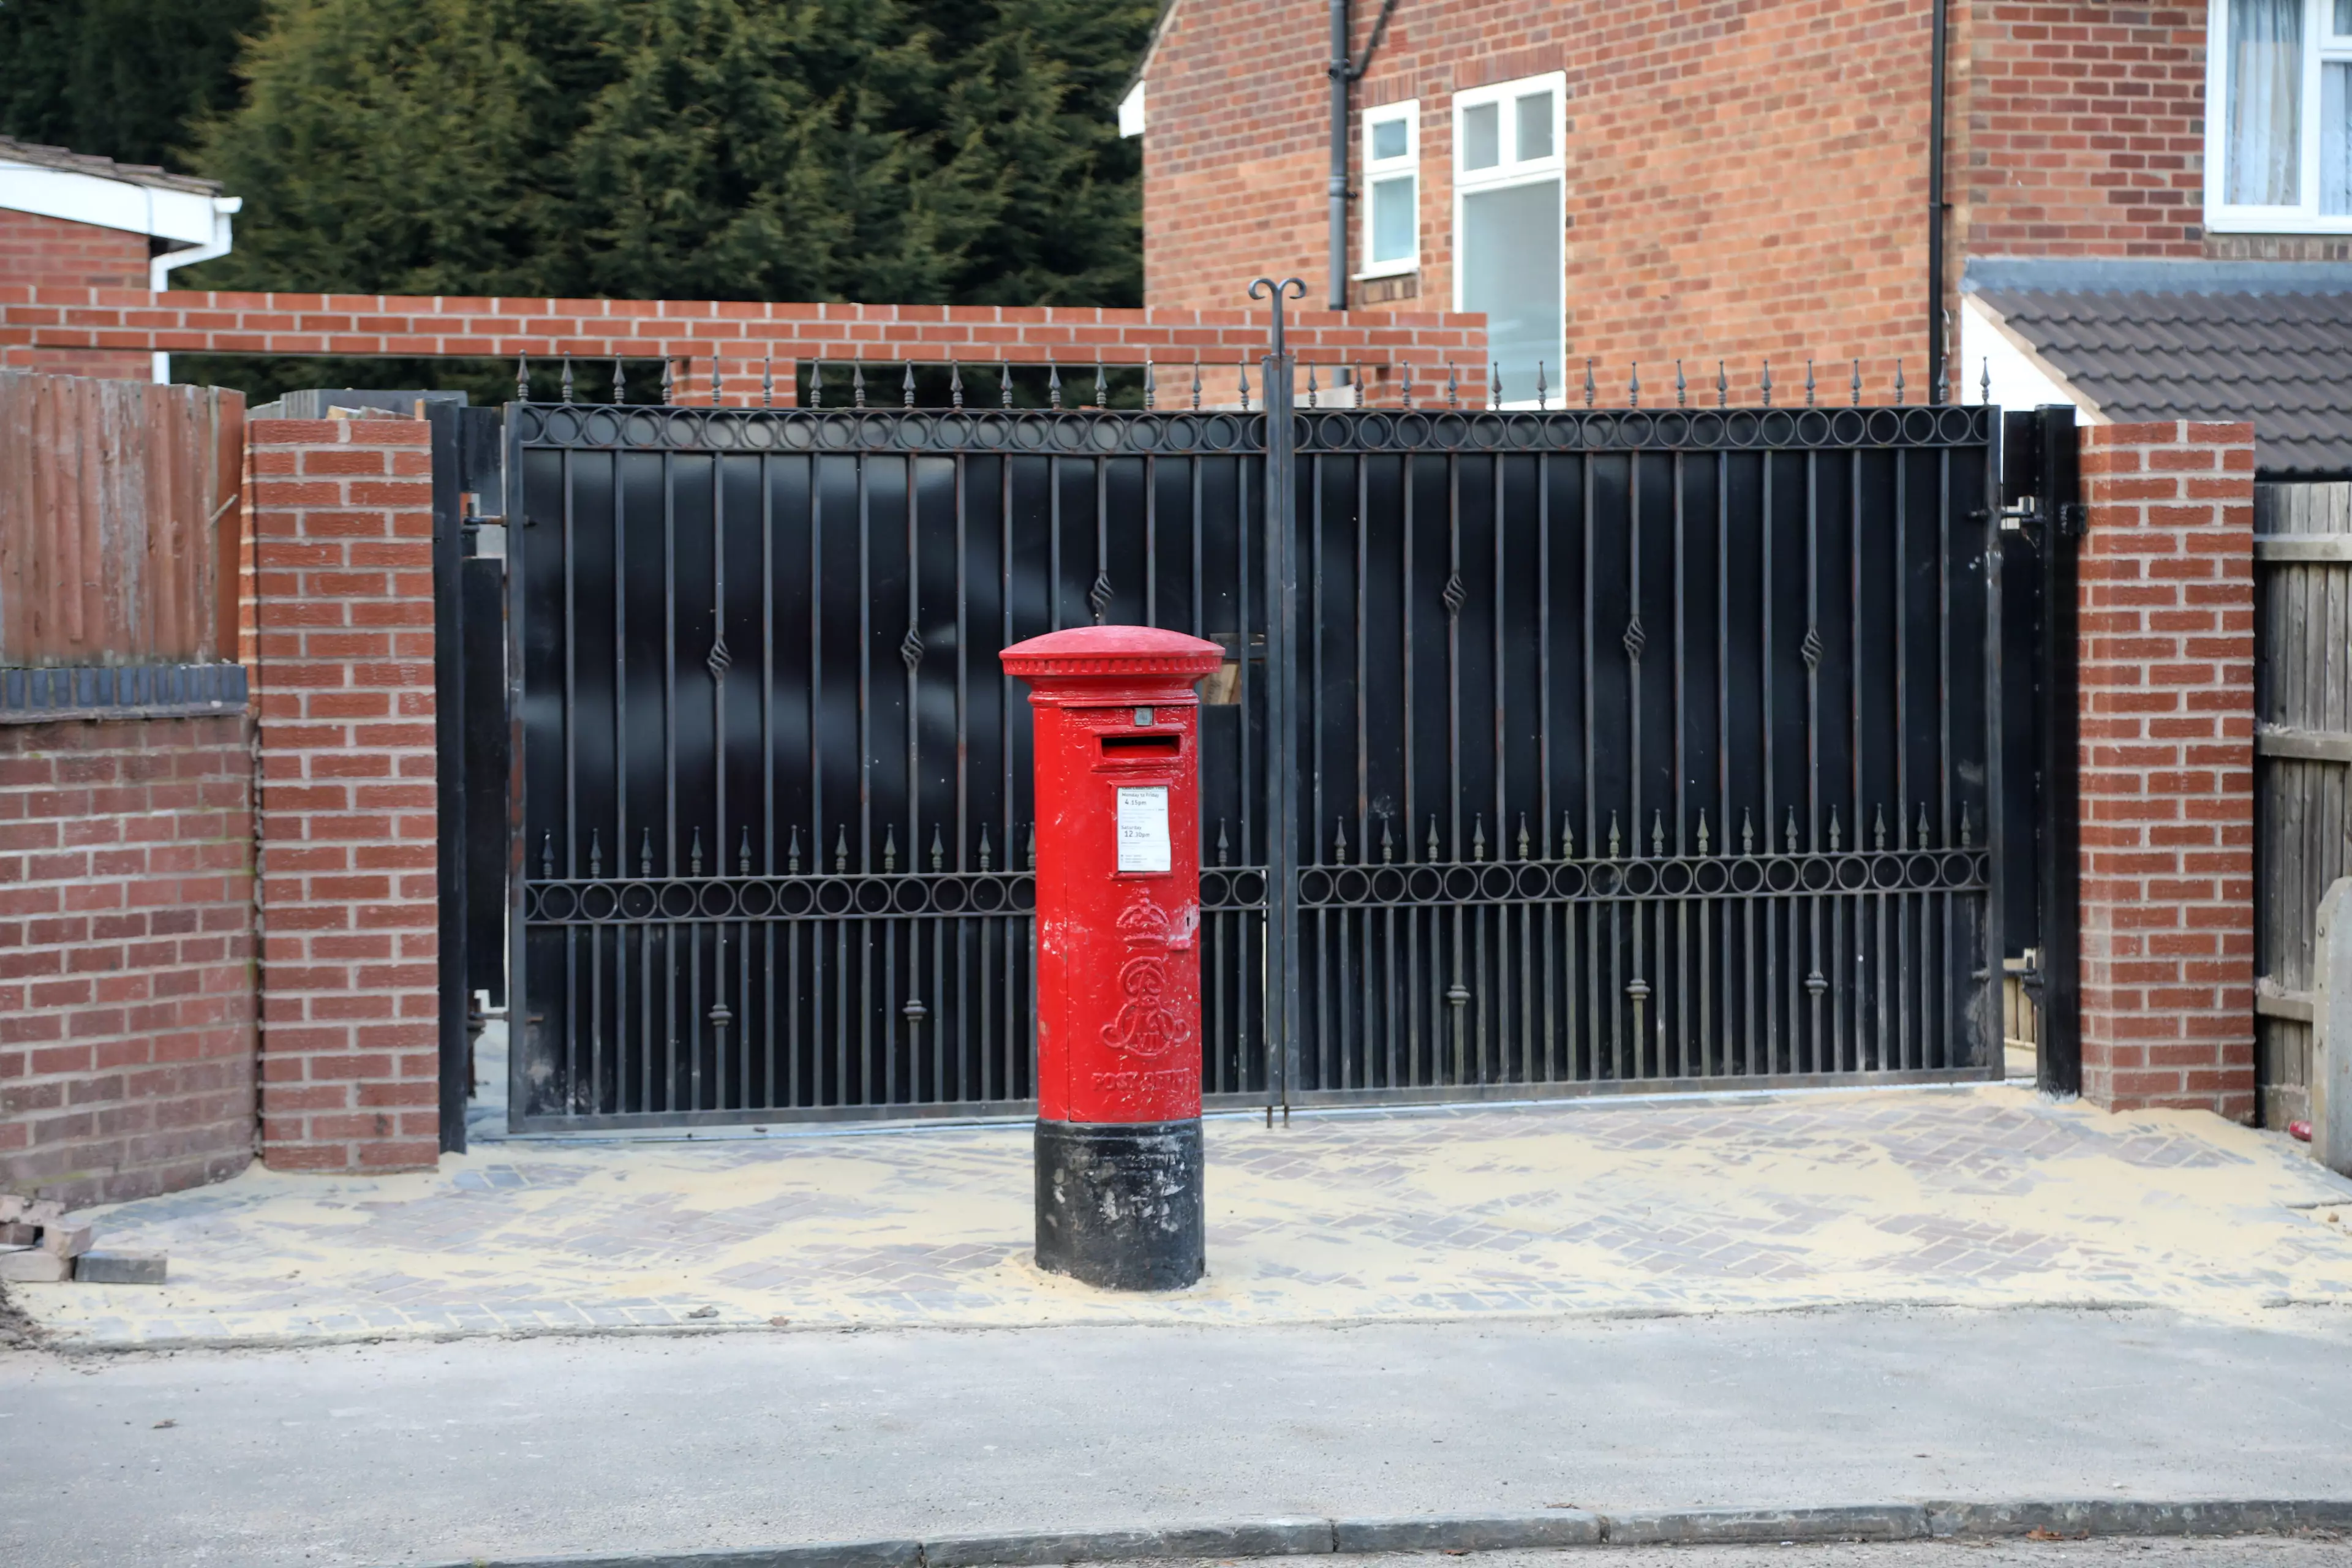 The Birmingham resident has asked for the postbox to be moved after widening his driveway.